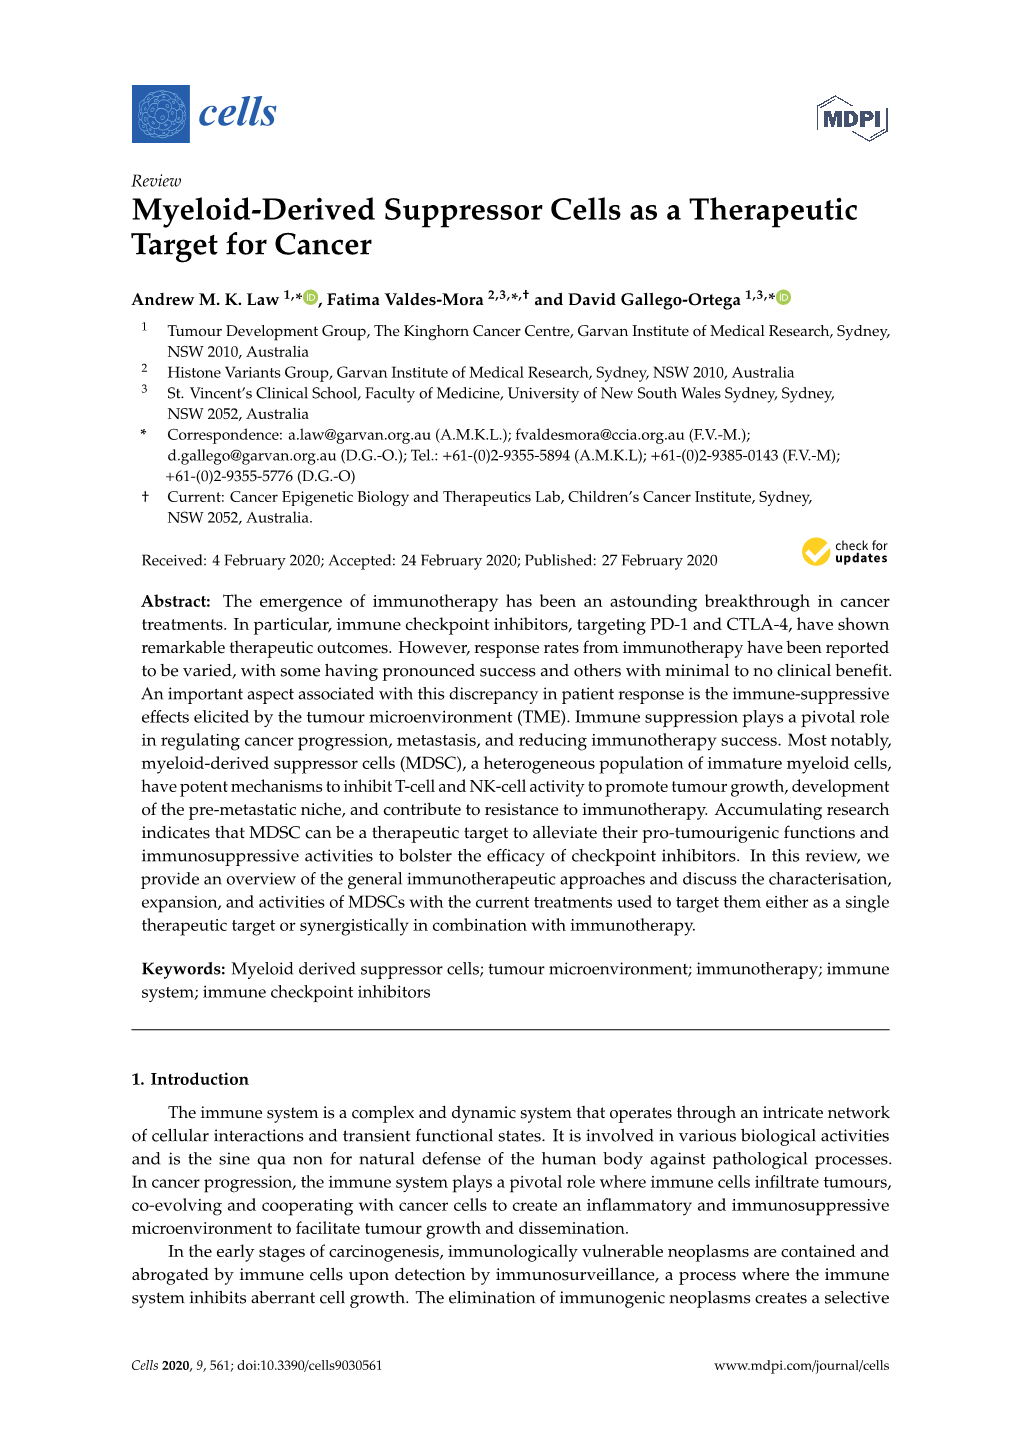 Myeloid-Derived Suppressor Cells As a Therapeutic Target for Cancer